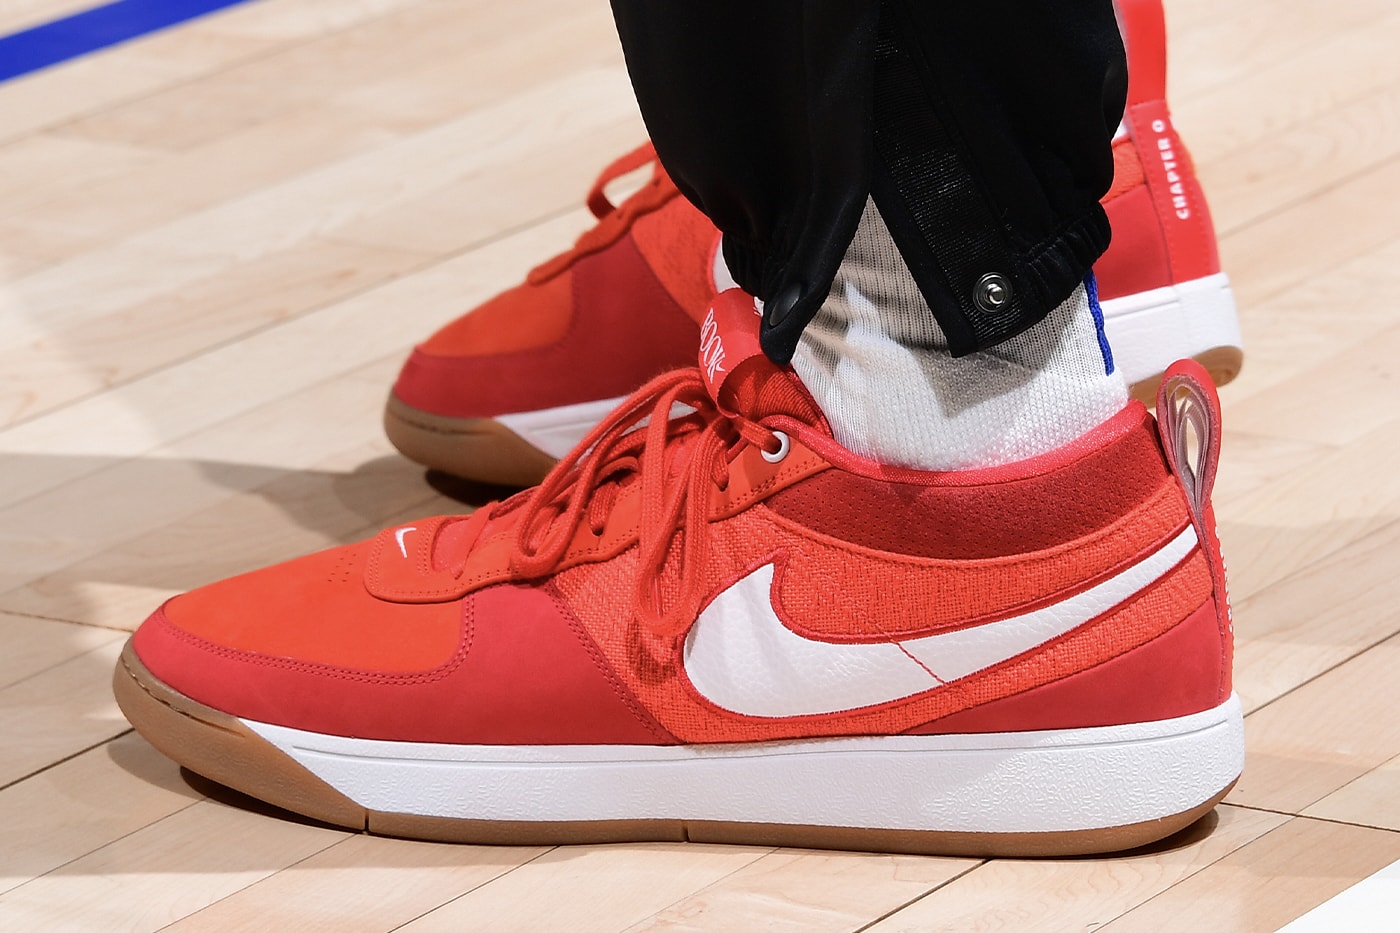 PJ Tucker Reveals His Own Pair of Nike Book 1 "Chapter 0" PEs basketball shoes in salmon red swoosh los angeles clippers snaker king all reds